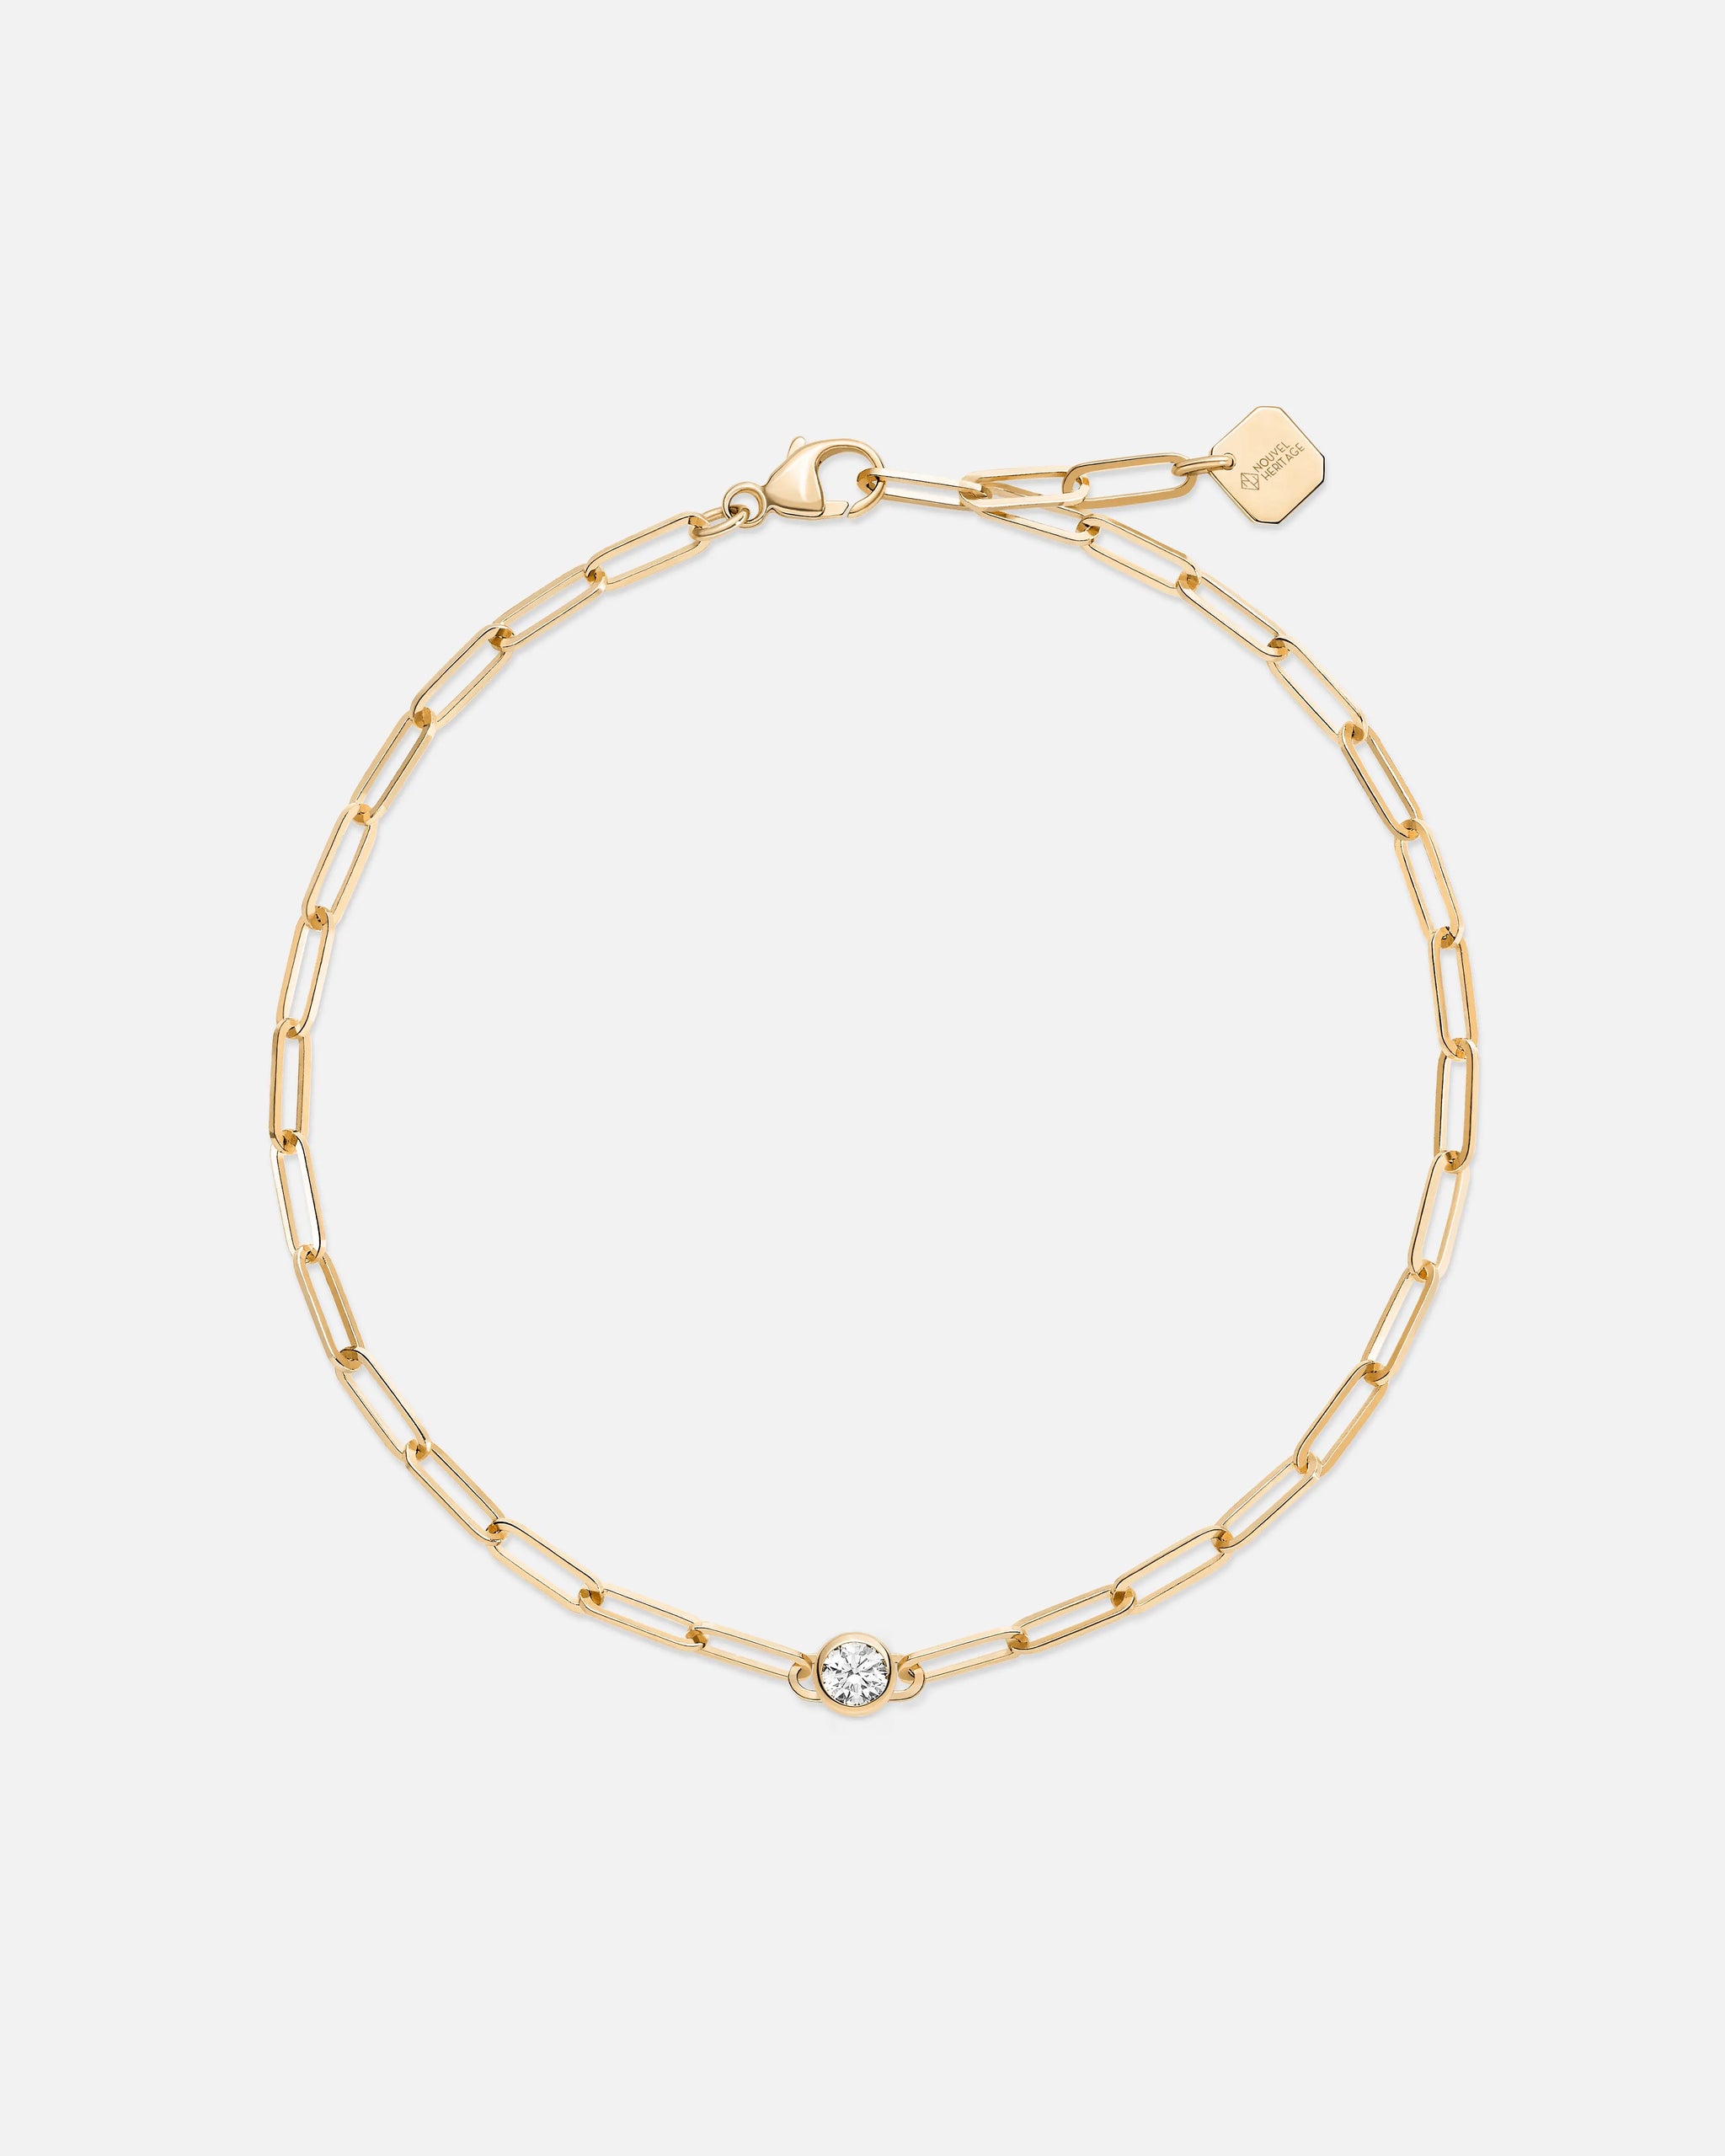 Round Classics Bracelet in Yellow Gold - 1 - Nouvel Heritage